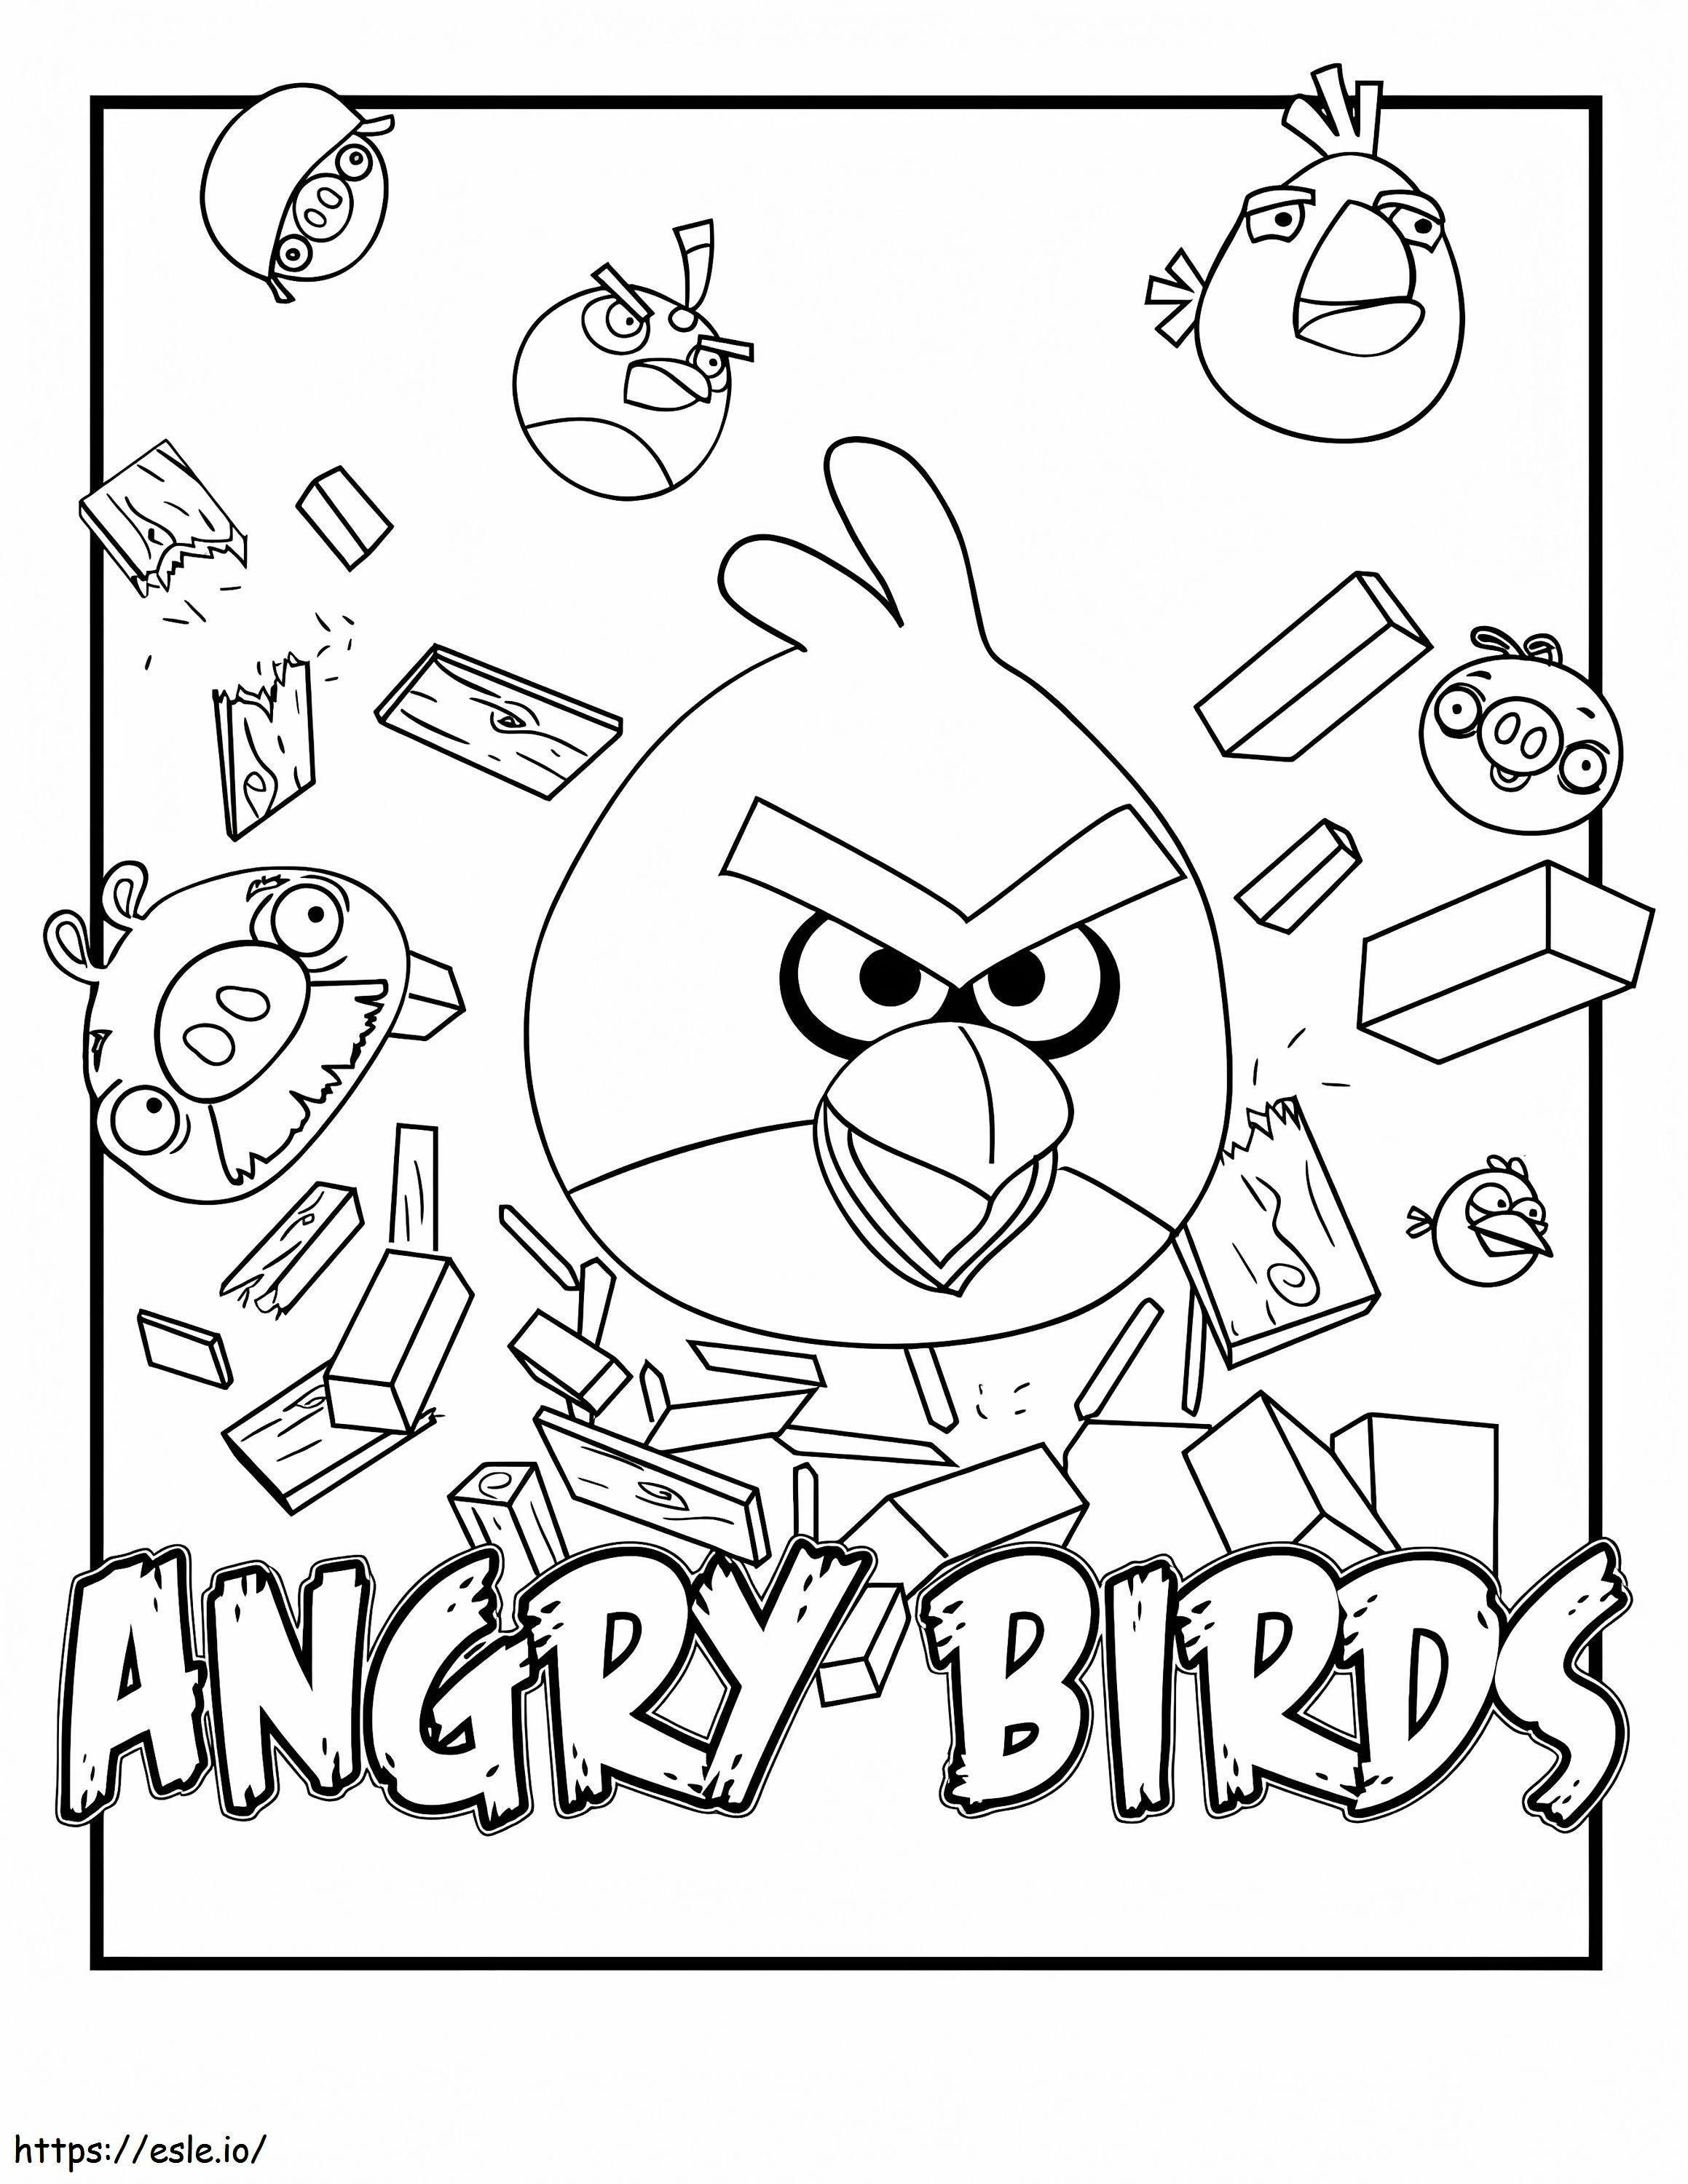 Buenos Angry Birds coloring page